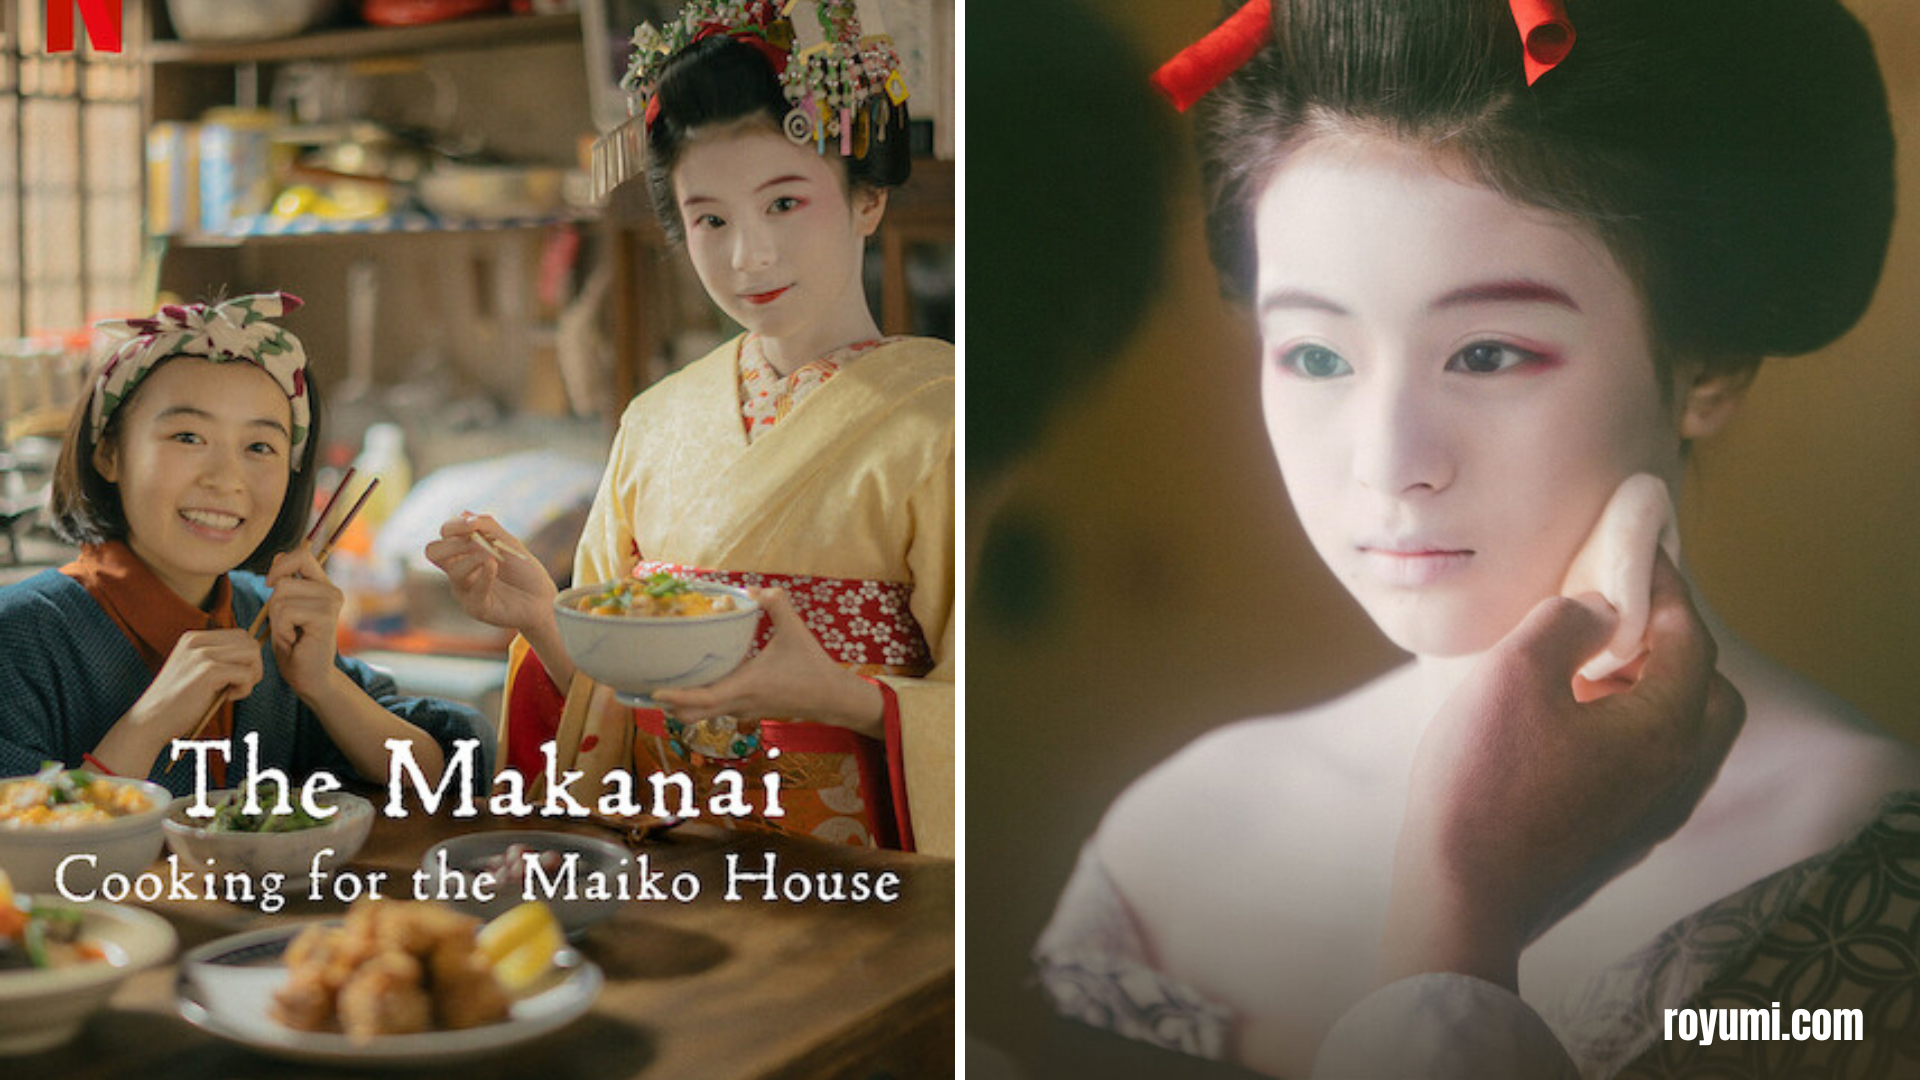 “The Makanai: Cooking for the Maiko House”: An audiovisual feast that delights the senses